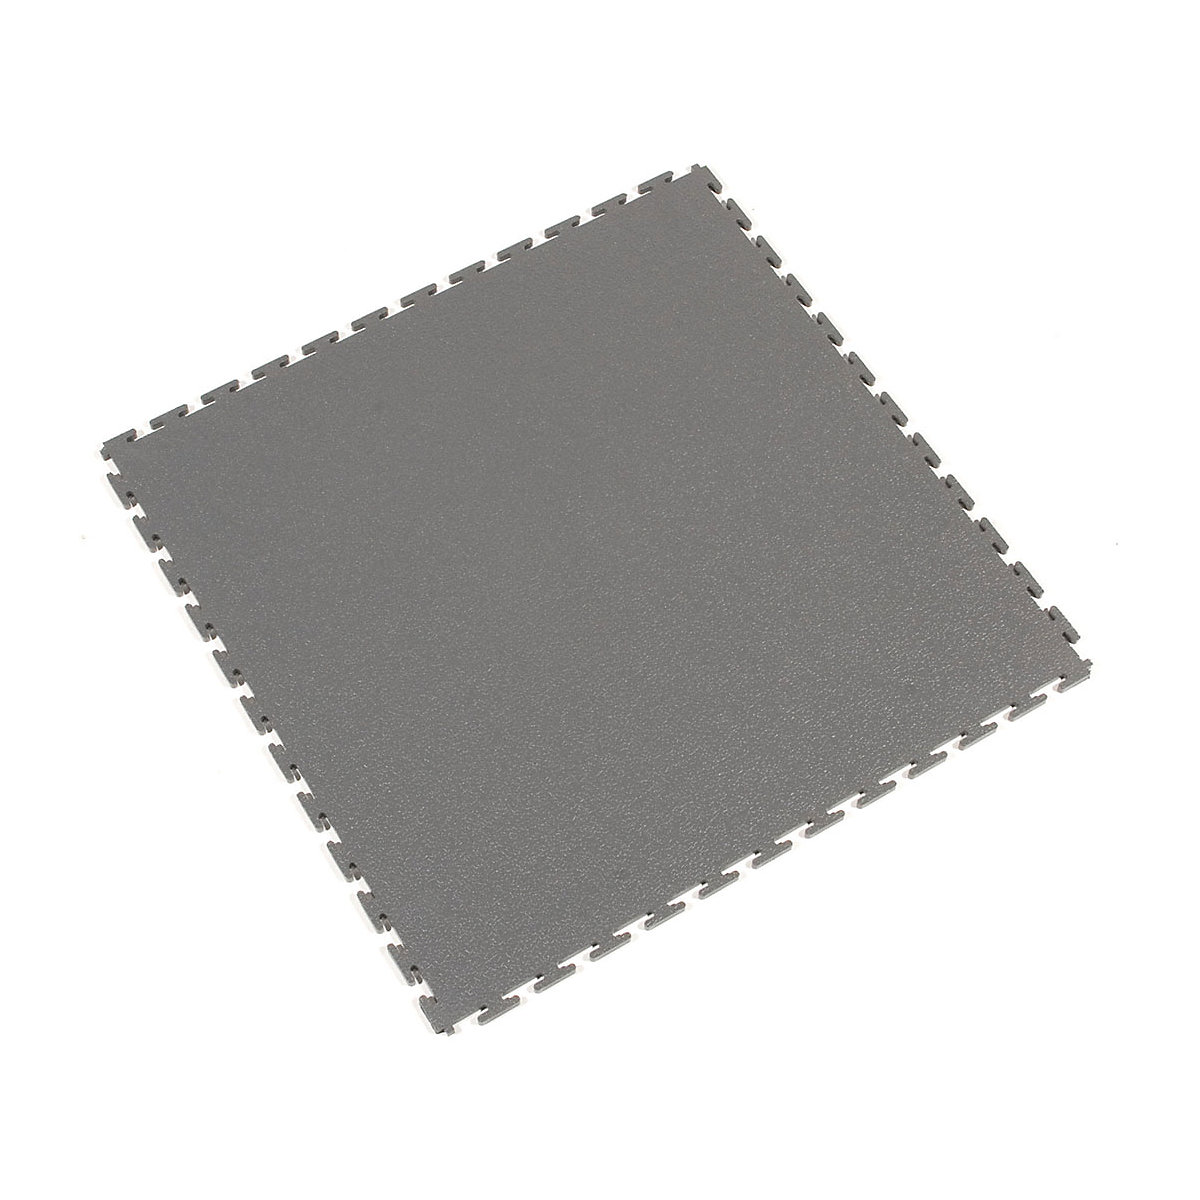 Tough-Lock PVC floor tiles, with structured surface, pack of 8, grey